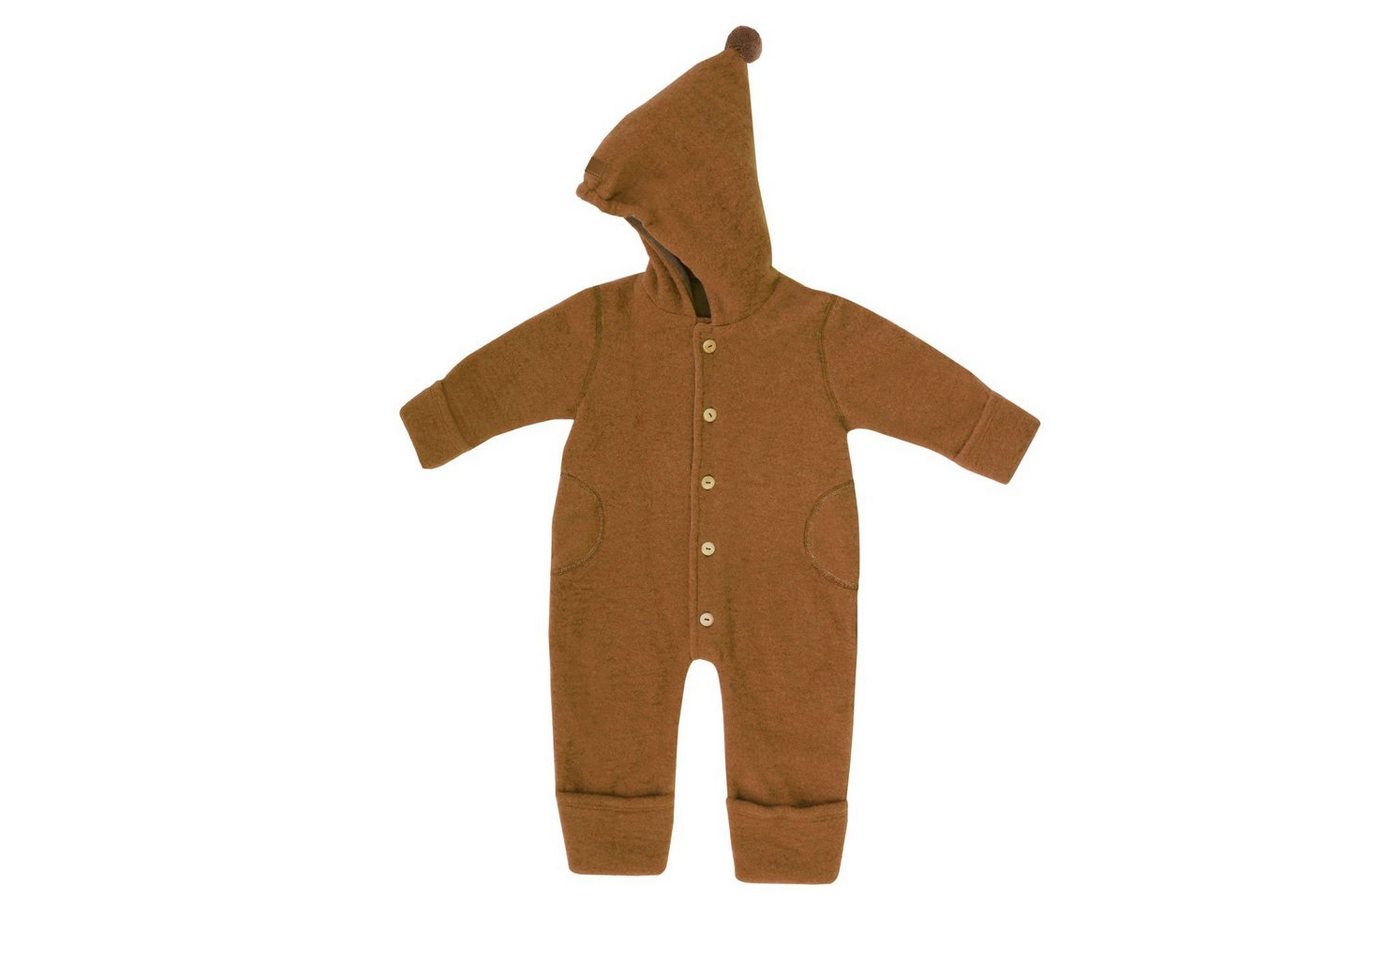 MAXIMO Overall GOTS BABY-Overall, Wollfleece kbT, Jersey kbA Wol Made in Germany von MAXIMO